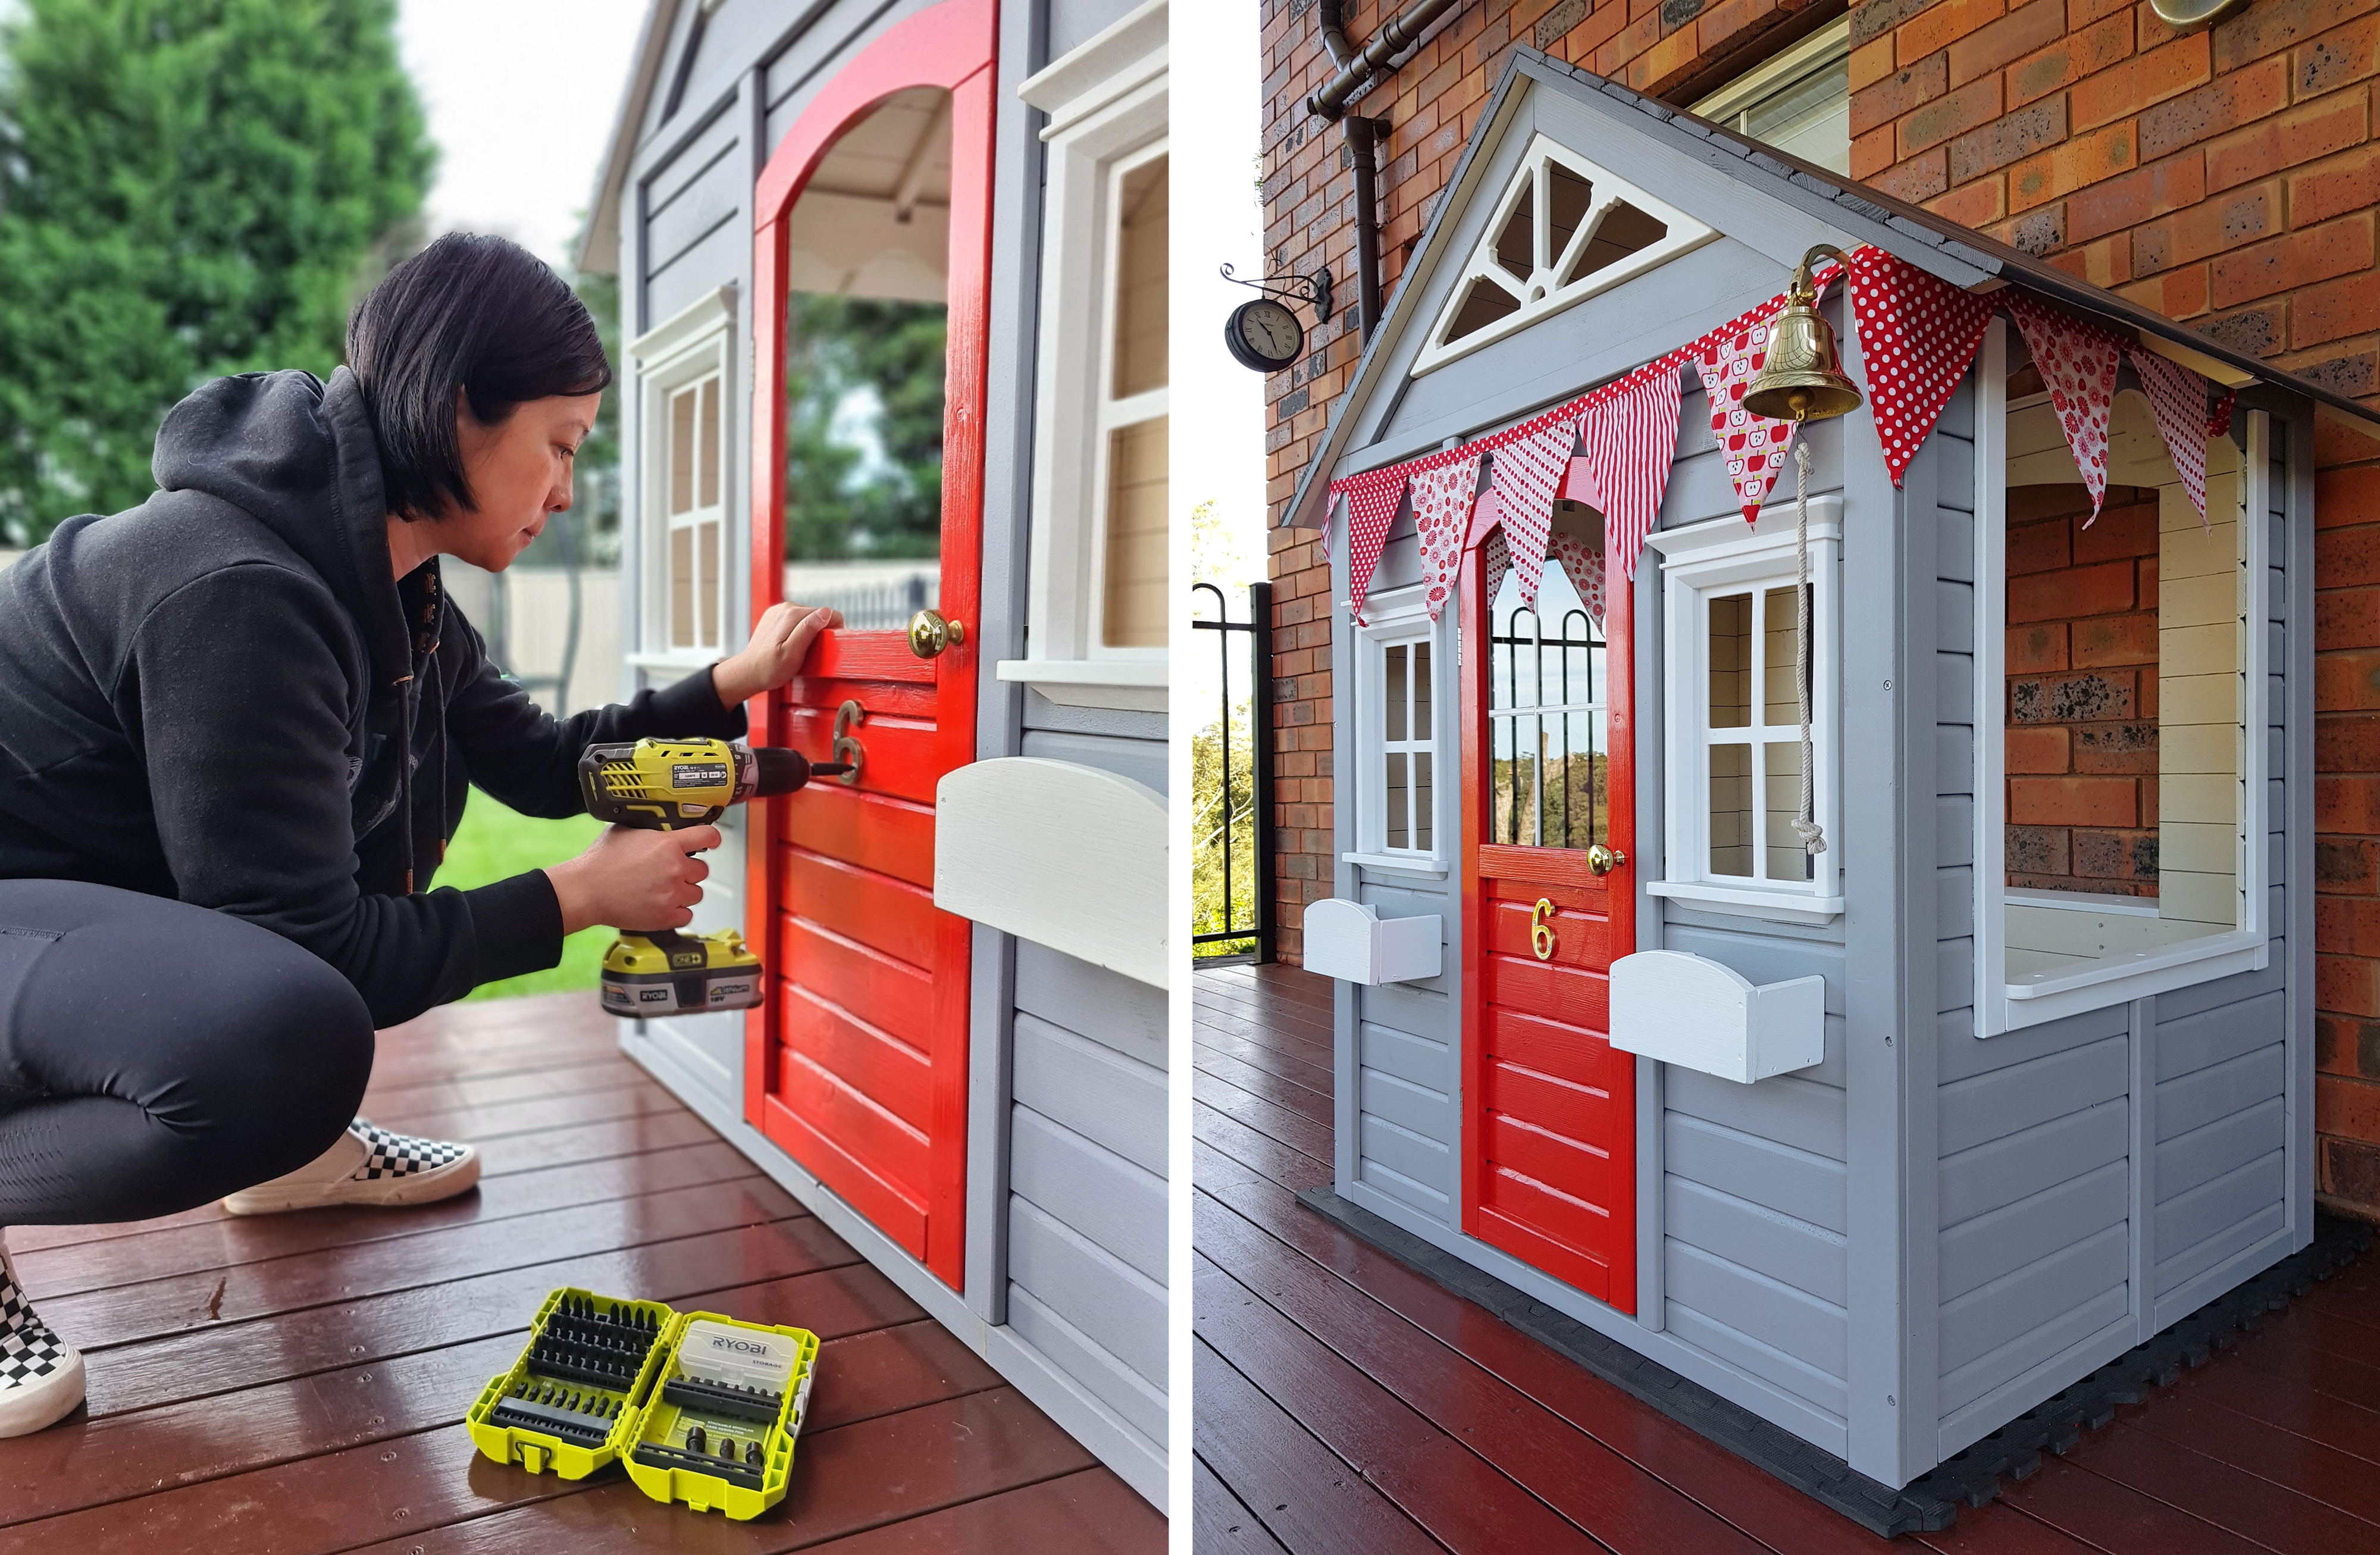 Salvaged from FB Marketplace, this old, weathered and word down KMART cubby house has been pressure cleaned, completely sanded and reinforced using my RYOBI tools, then painted and decorated in glorious Hamptons style to live another day, and provide many hours of backyard fun for our two small kids!